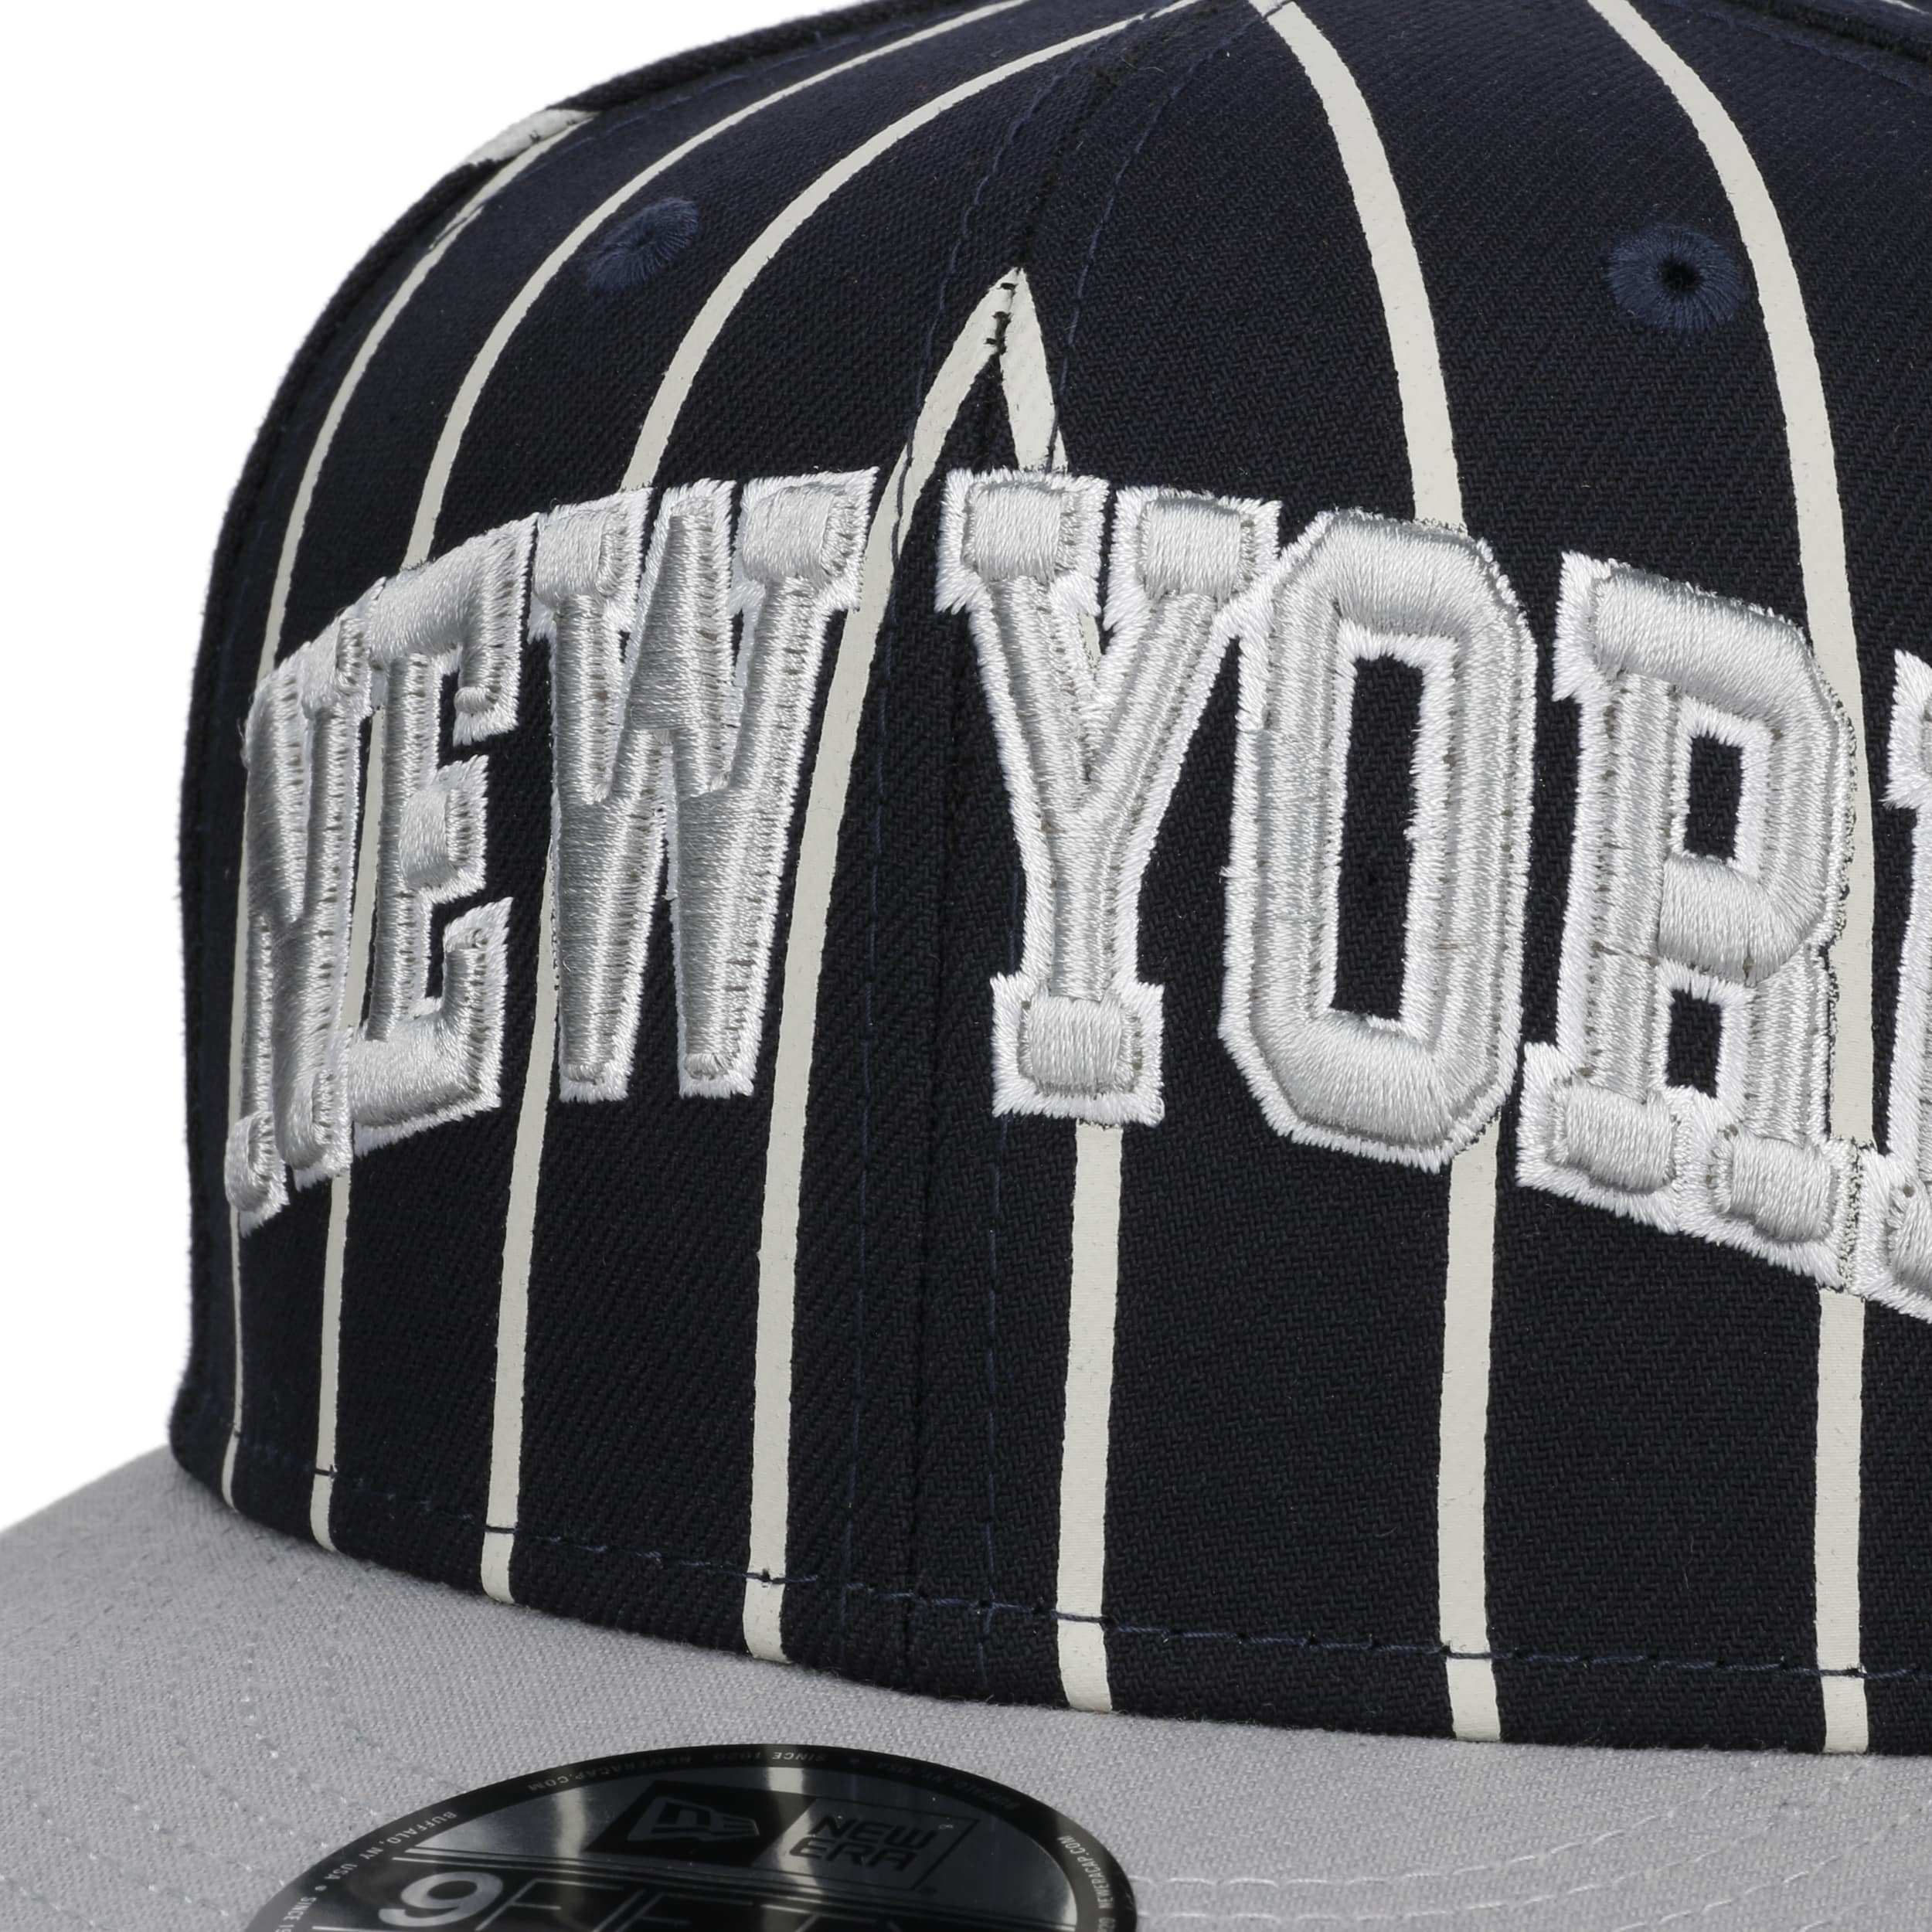 9Fifty Yankees Stripes Cap by New Era - 48,95 €